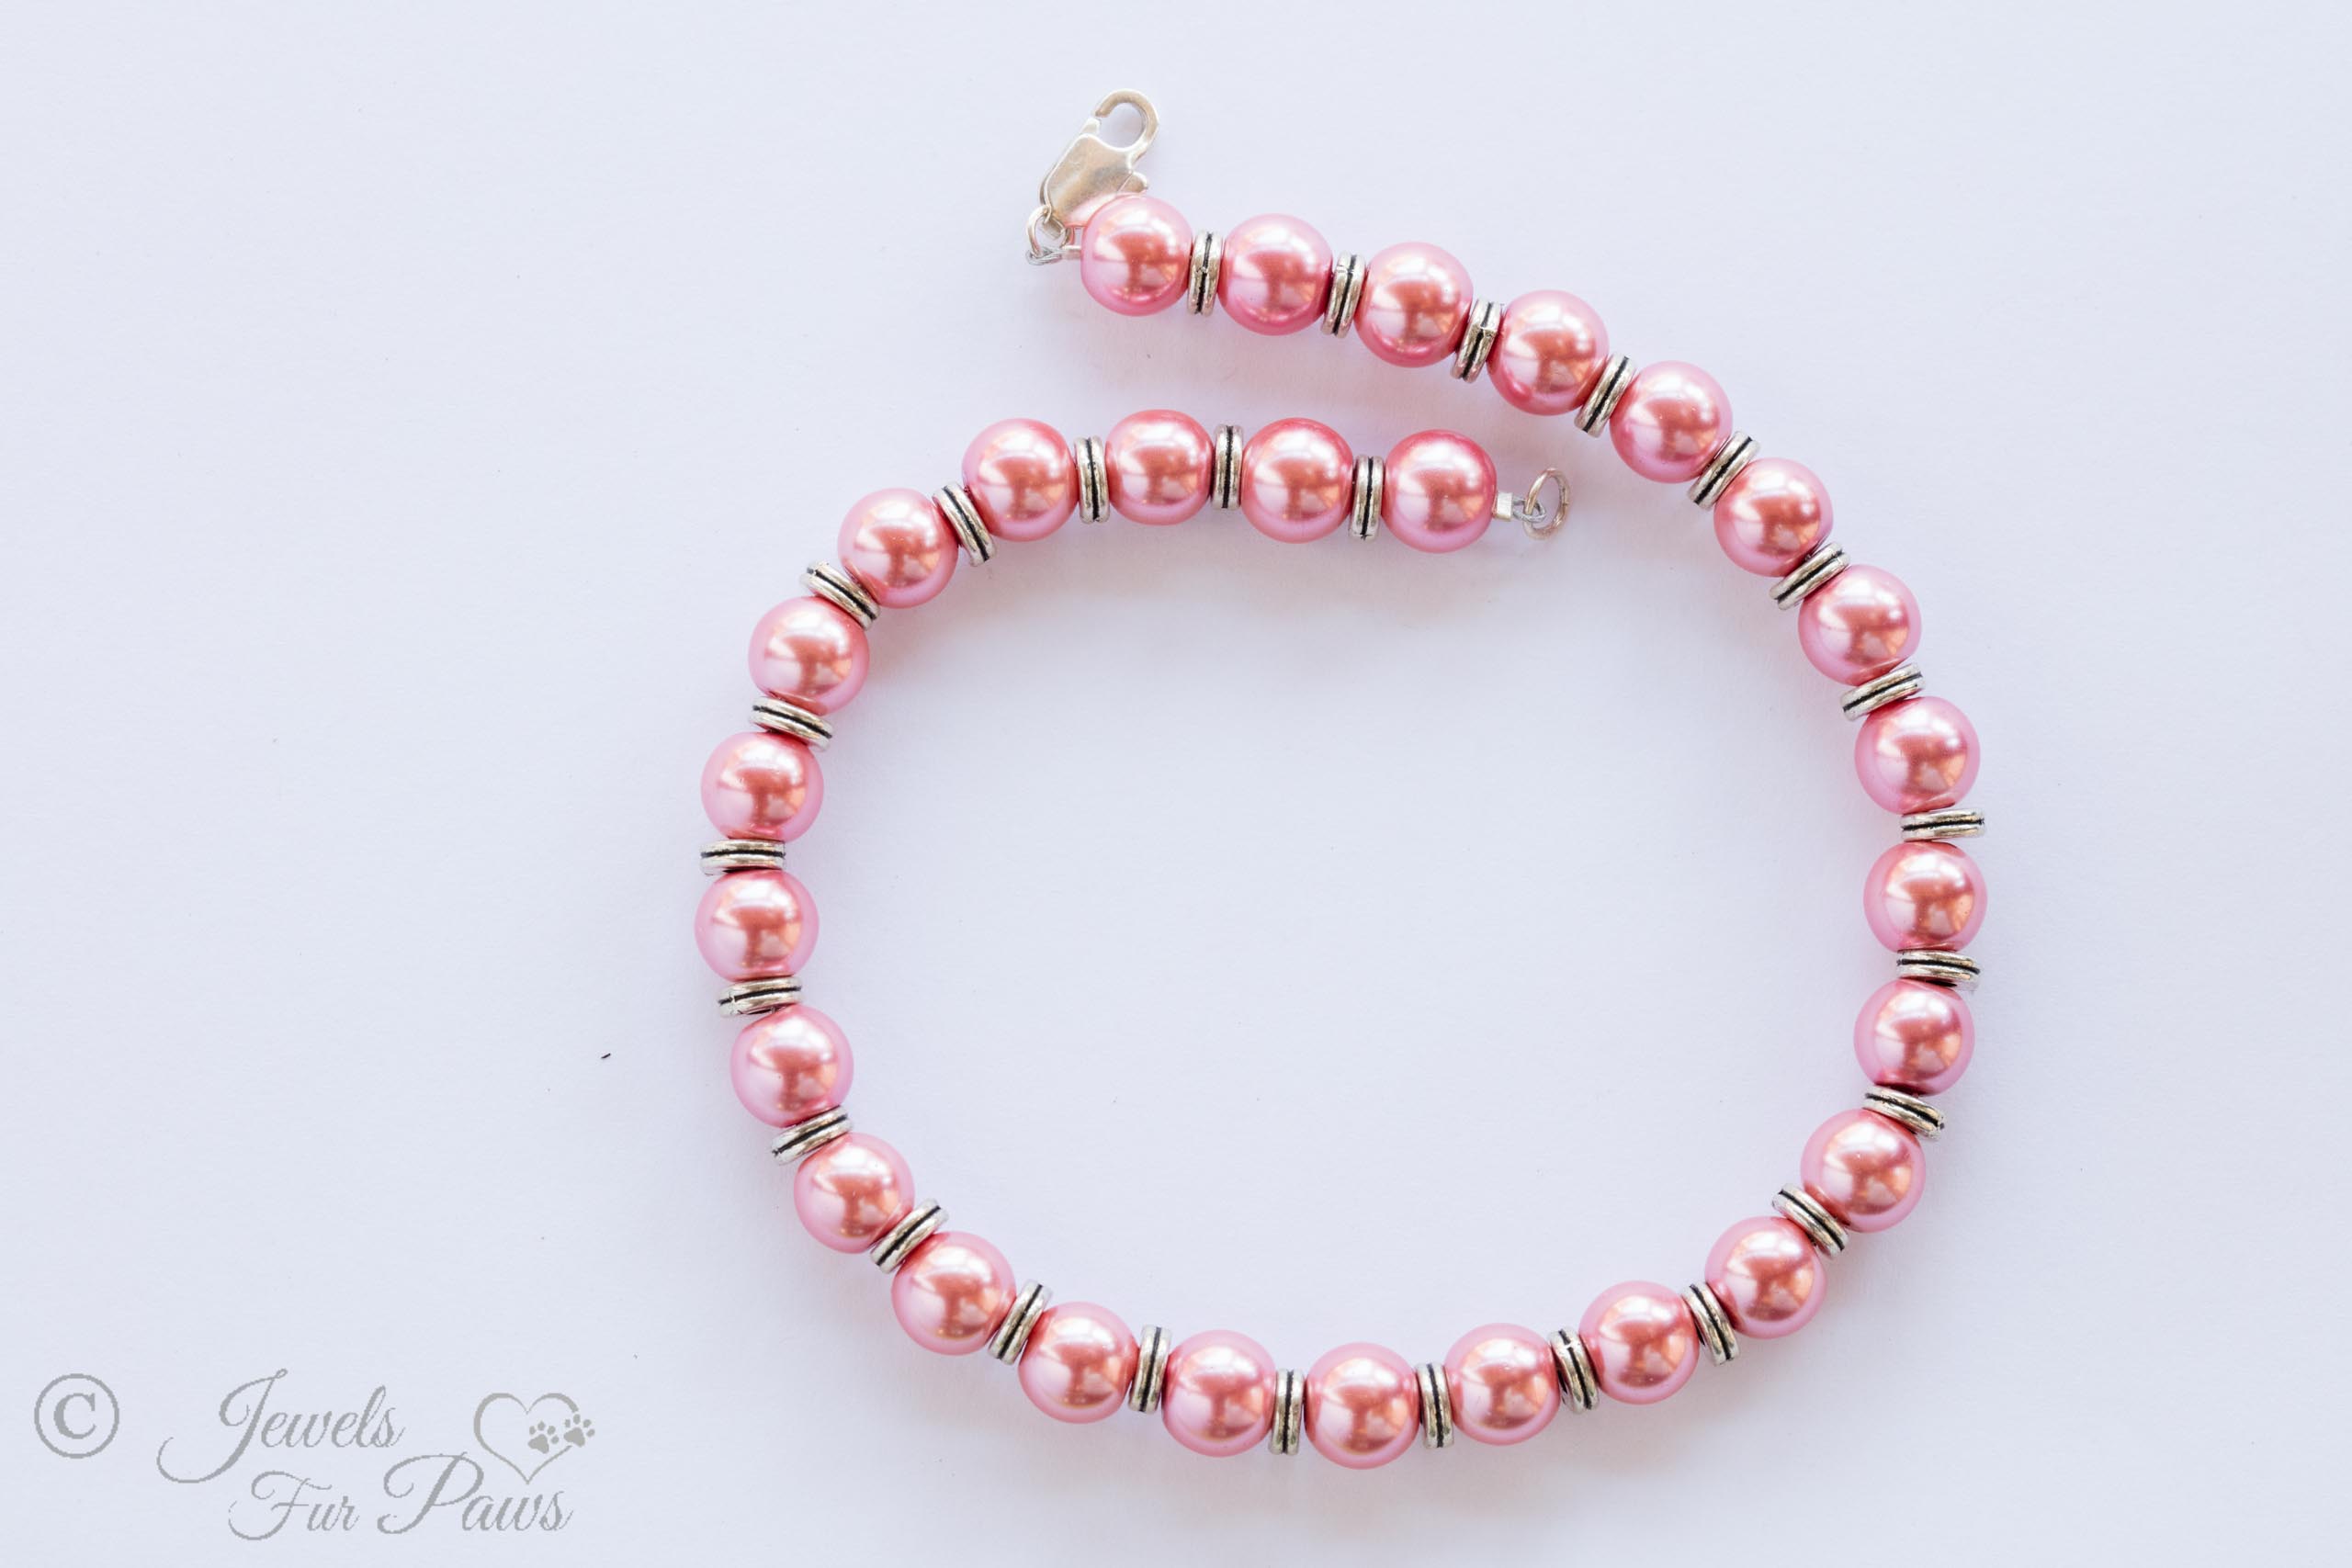 dog cat pet necklace pink pearls with round disc silver spacers on white background